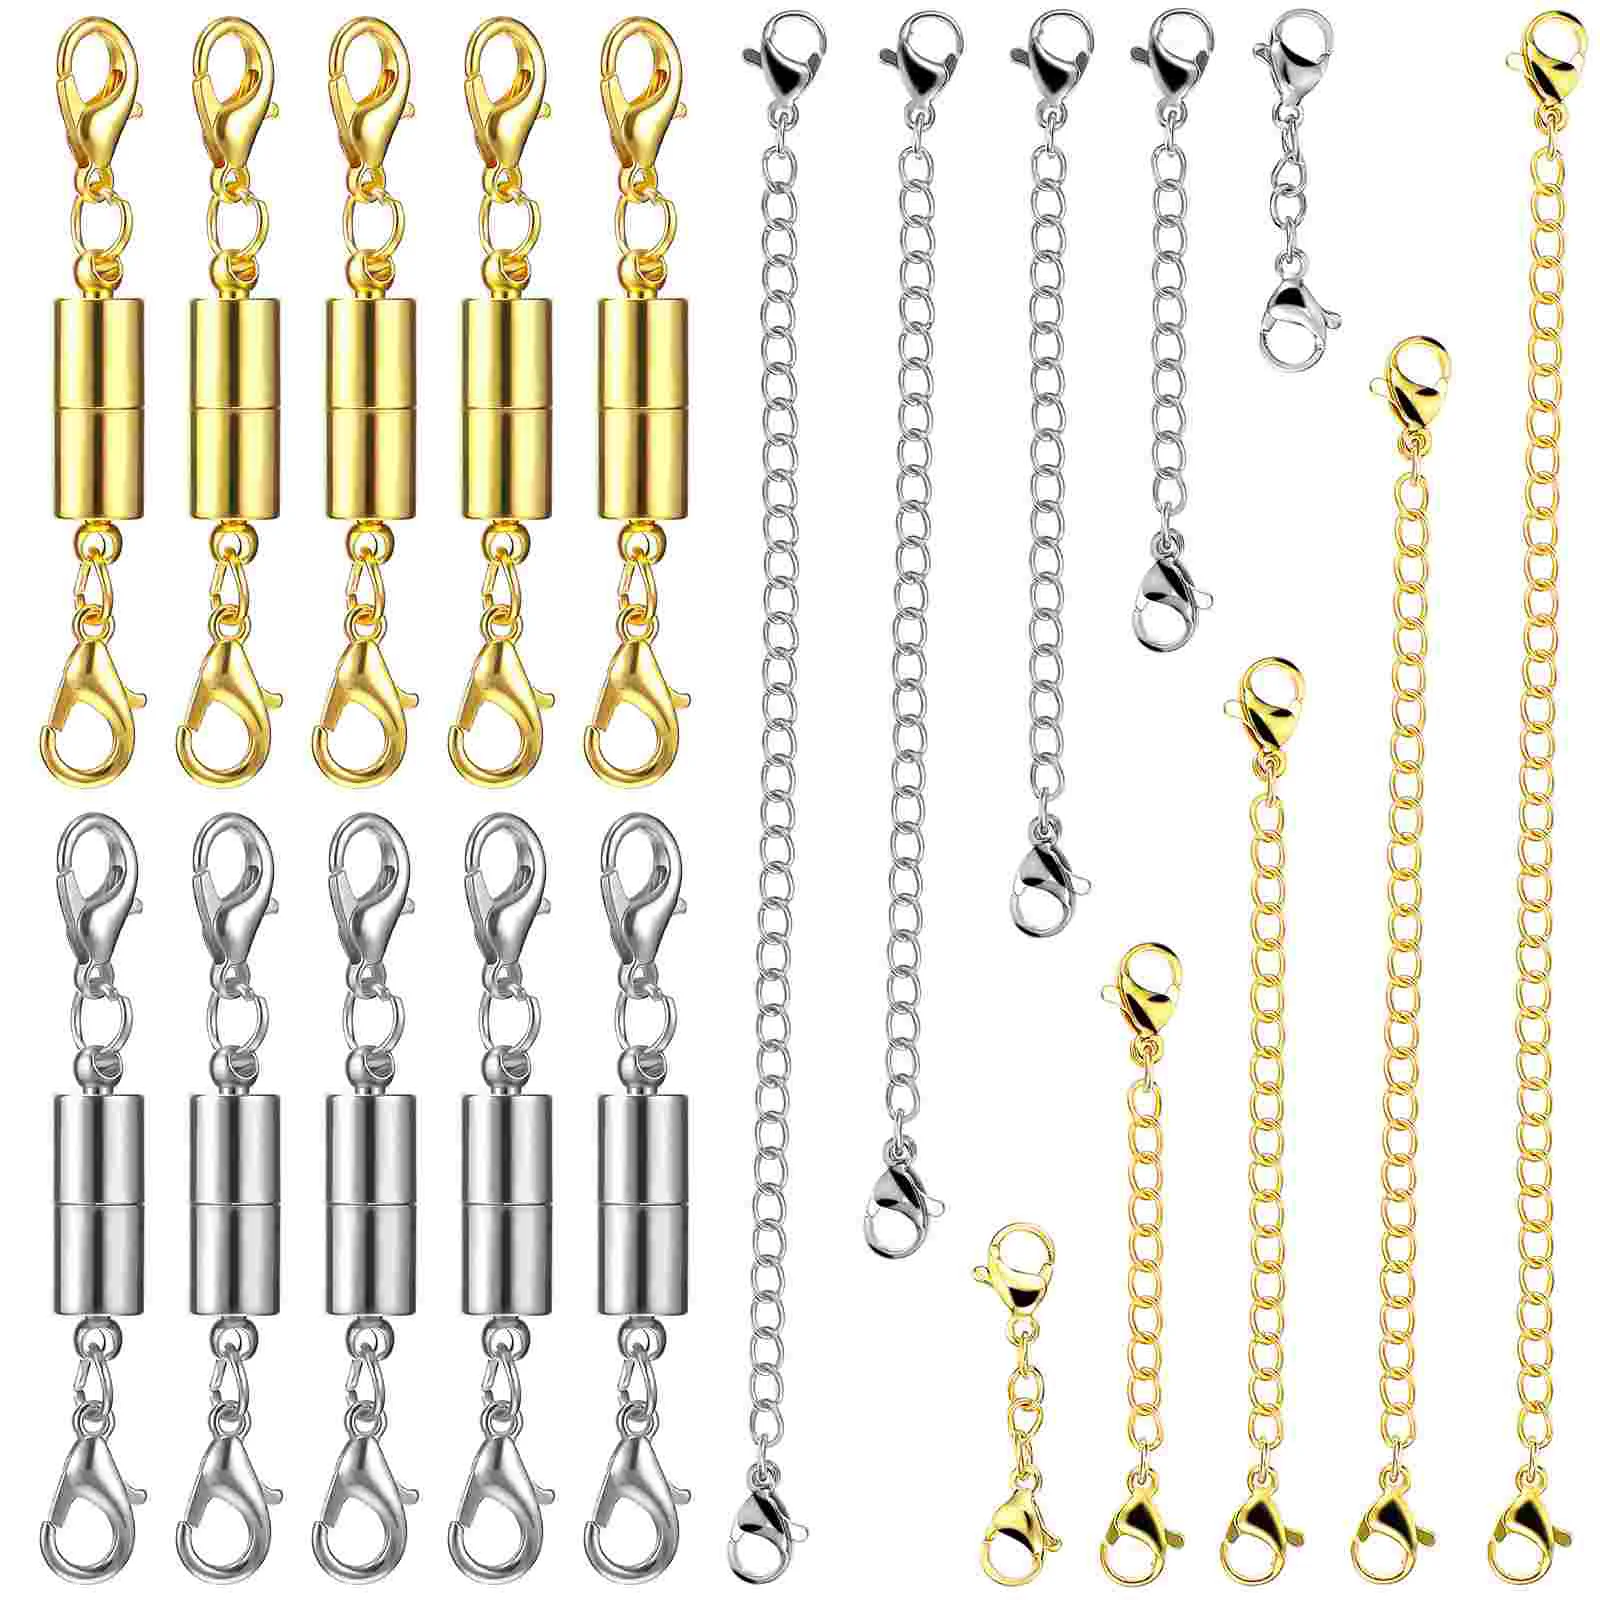 

10 Pcs Chain Extender Sliver Magnetic Connector Clasps Jewelry Extenders Necklace Stainless Steel Making Supplies